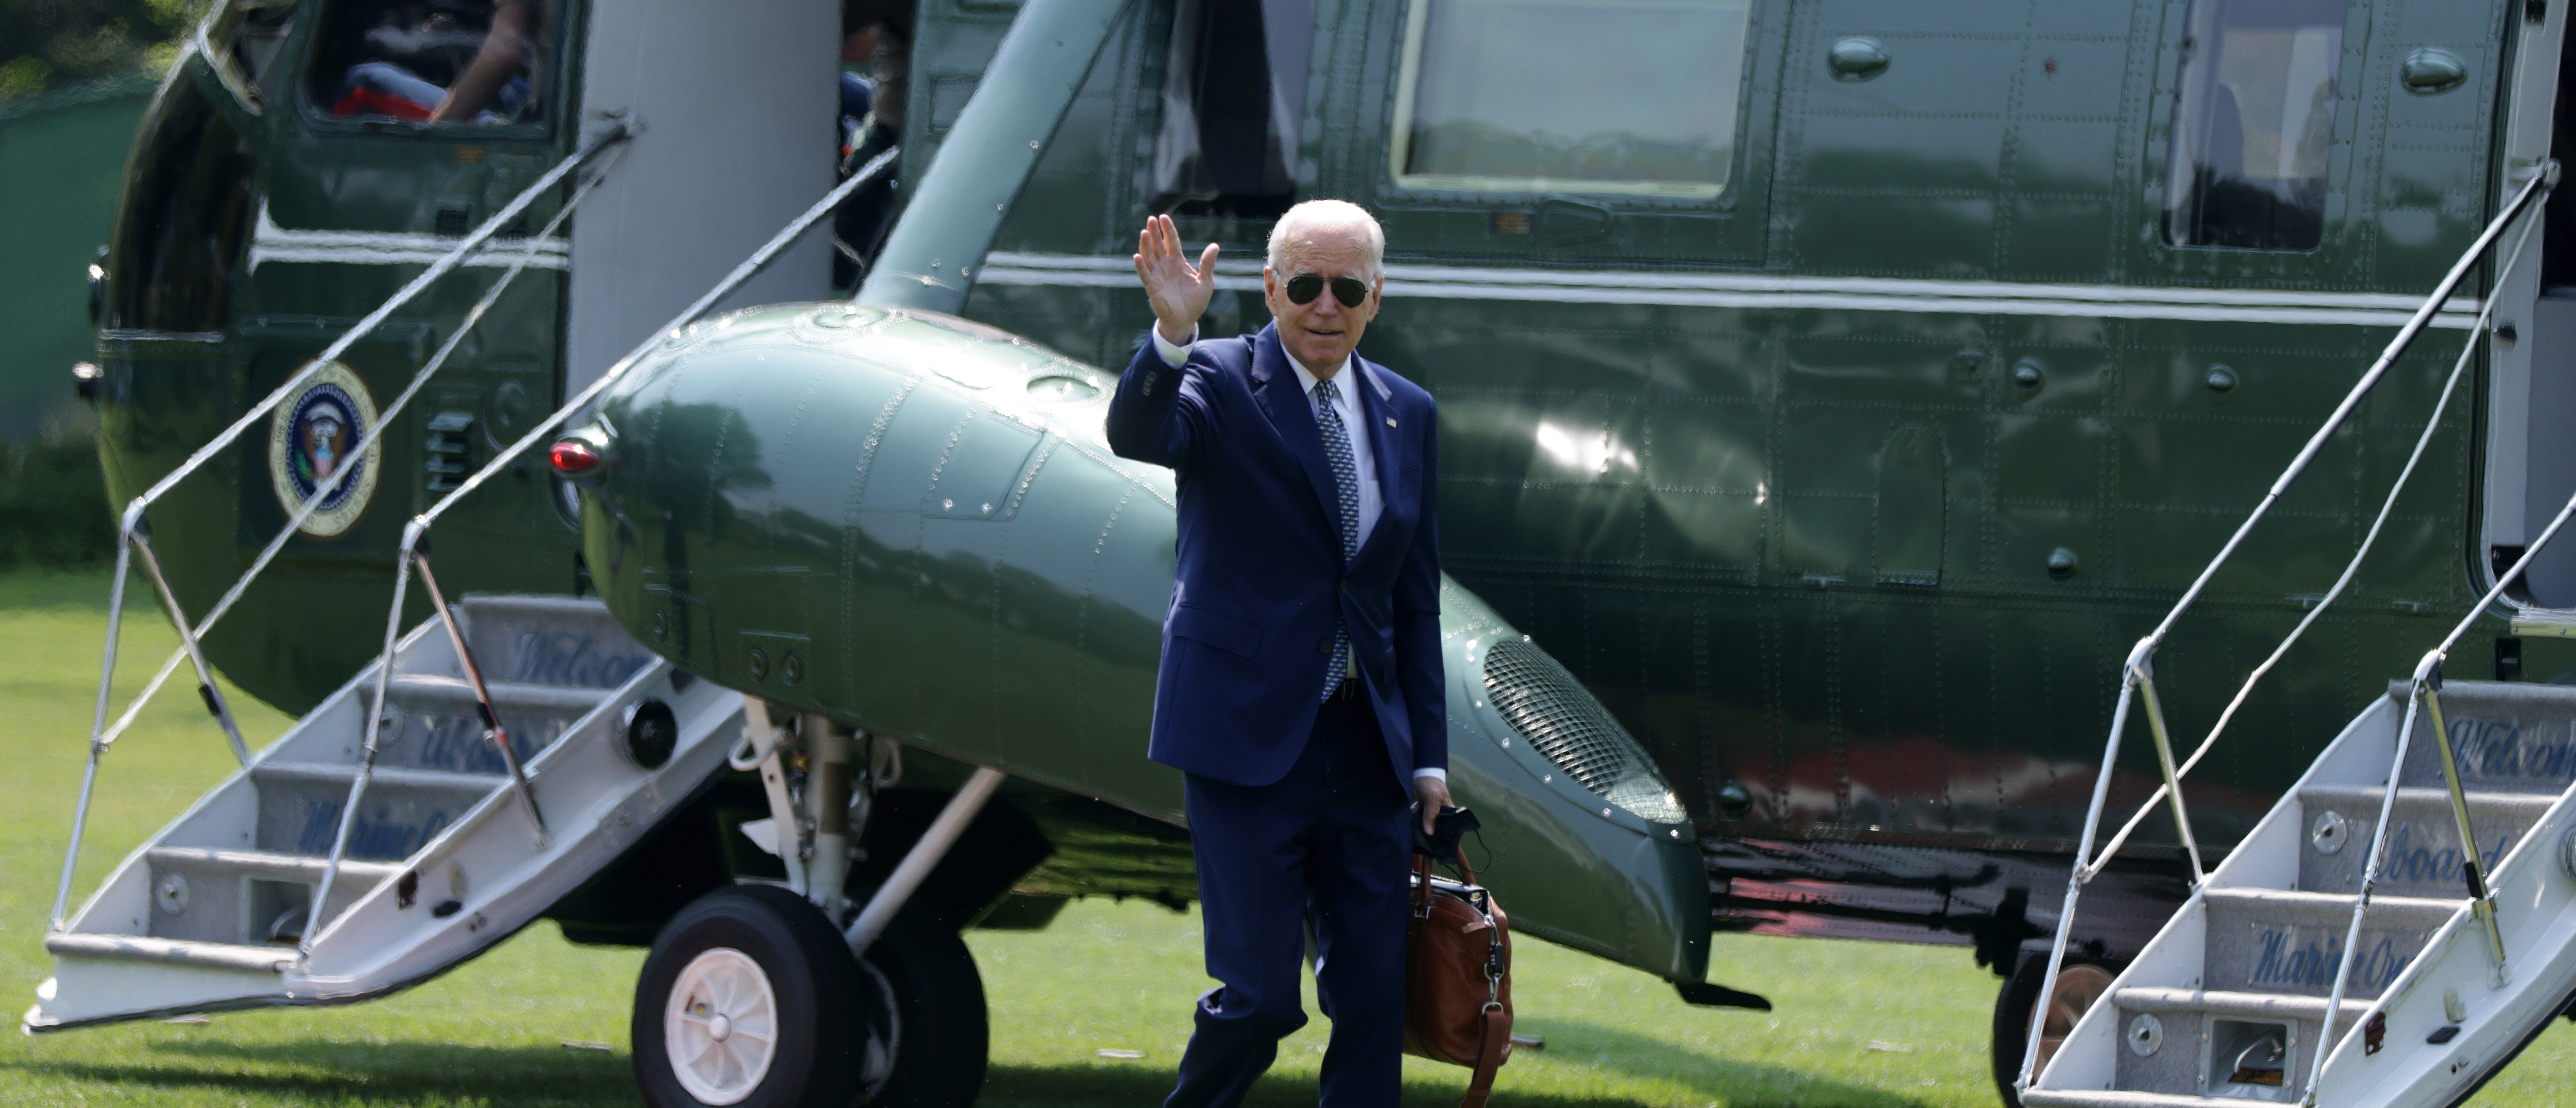 WASHINGTON, DC - AUGUST 10: U.S. President Joe Biden walks on the South Lawn after he returned to the White House August 10, 2021 in Washington, DC. President Biden has returned to Washington after he spent a long weekend in Wilmington, Delaware. (Photo by Alex Wong/Getty Images)